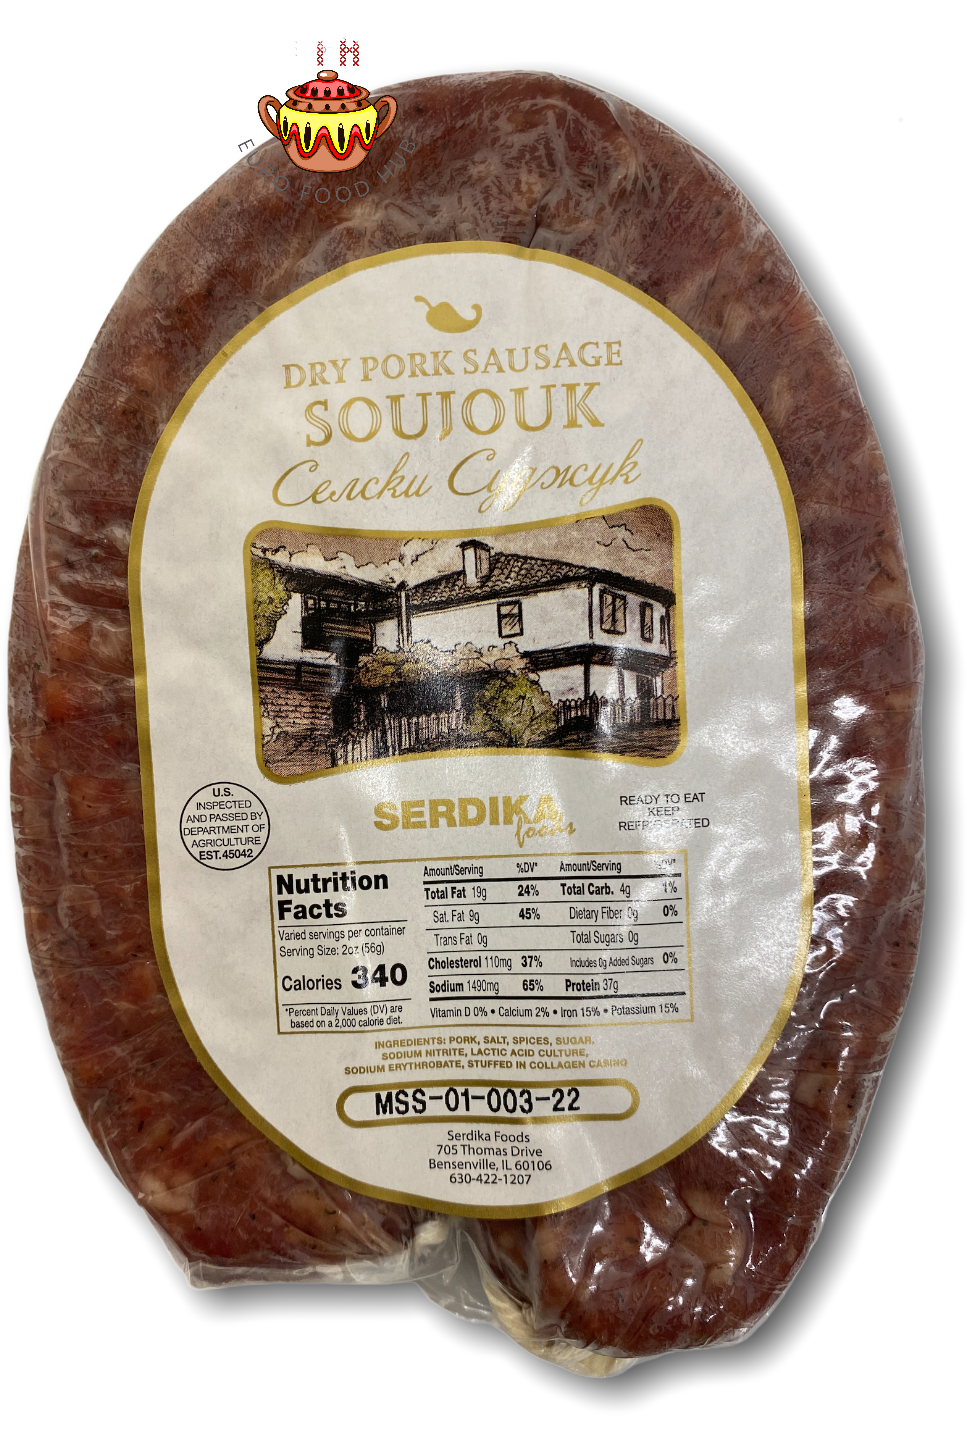 Sudjuk Country Style - Dry Cured Pork Sausage